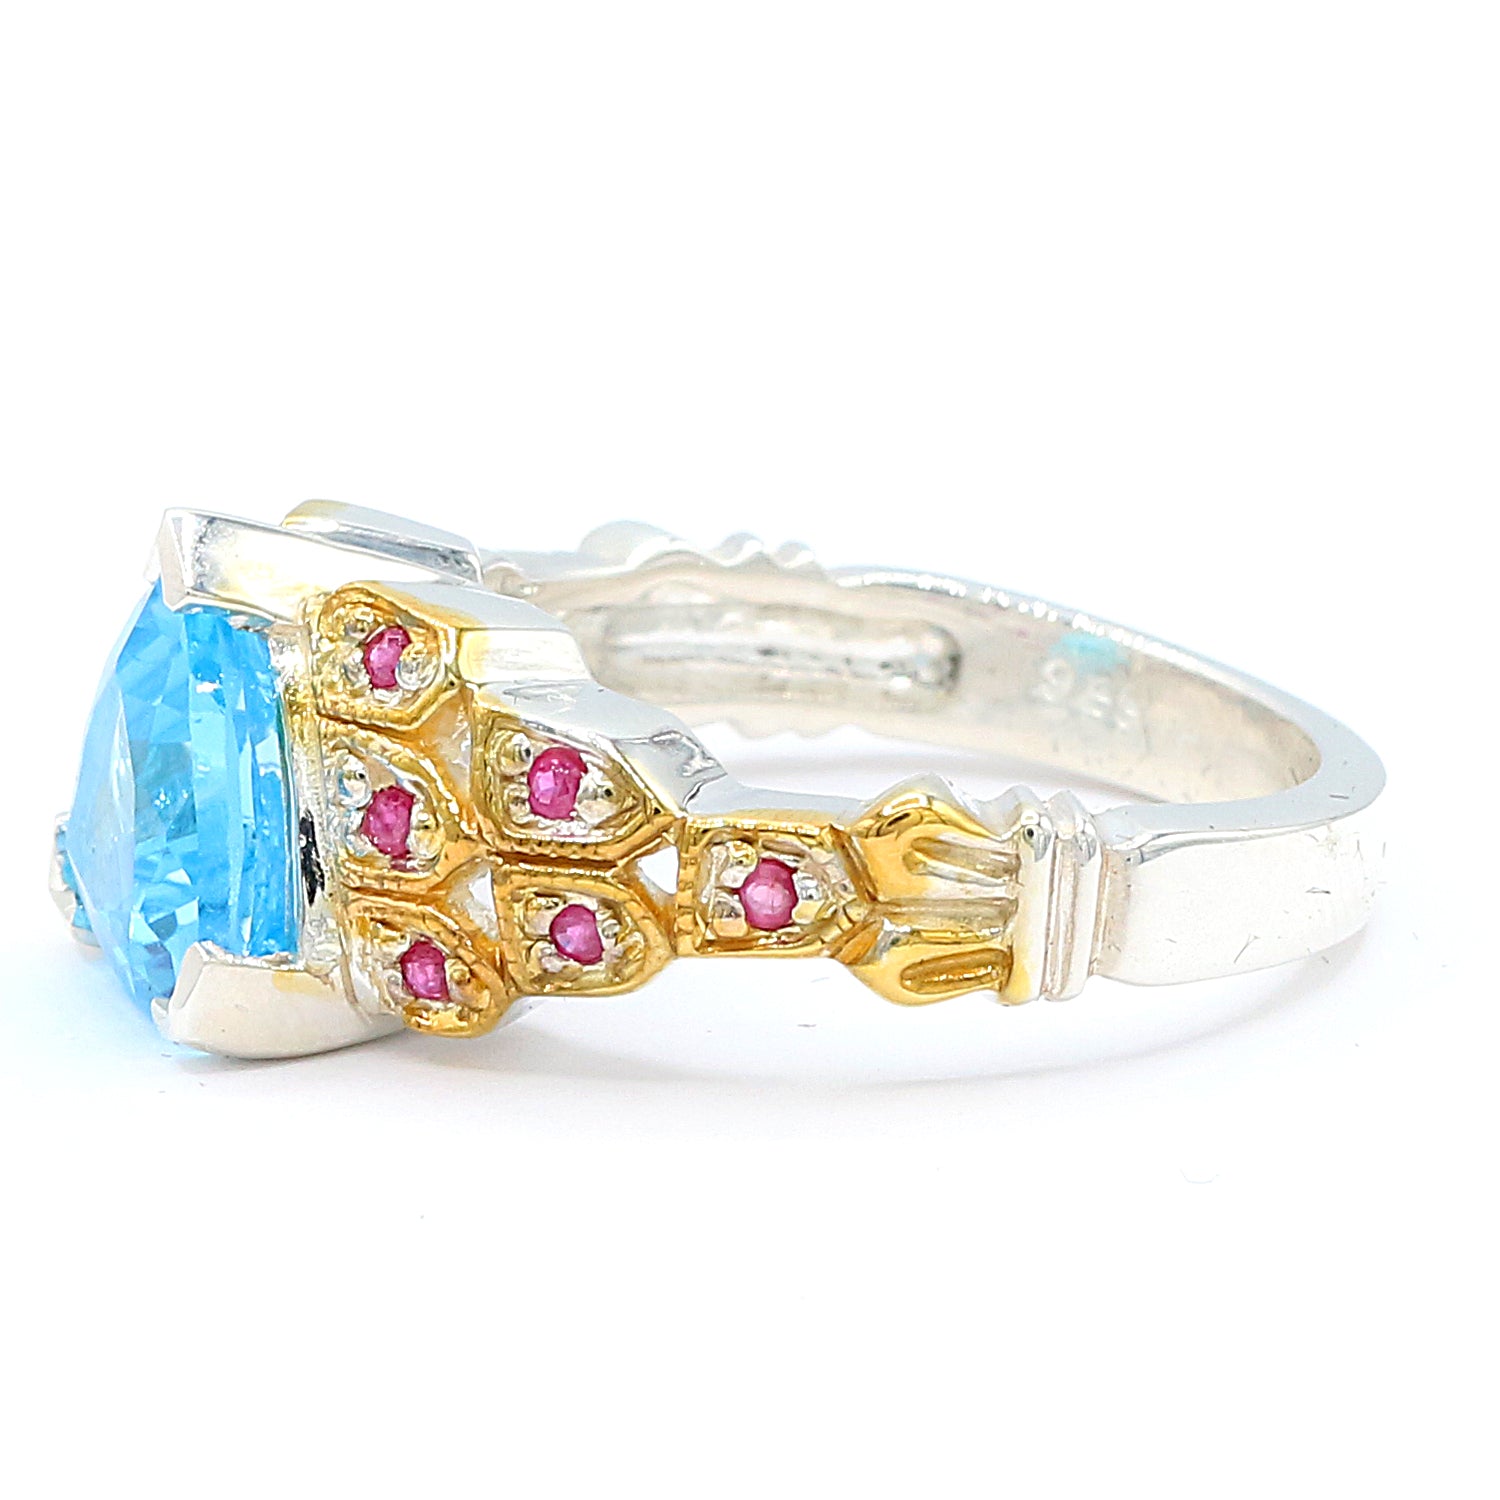 Michael's Originals One-of-a-kind 3.57ctw Trillion Super Swiss Blue Topaz & Ruby Ring